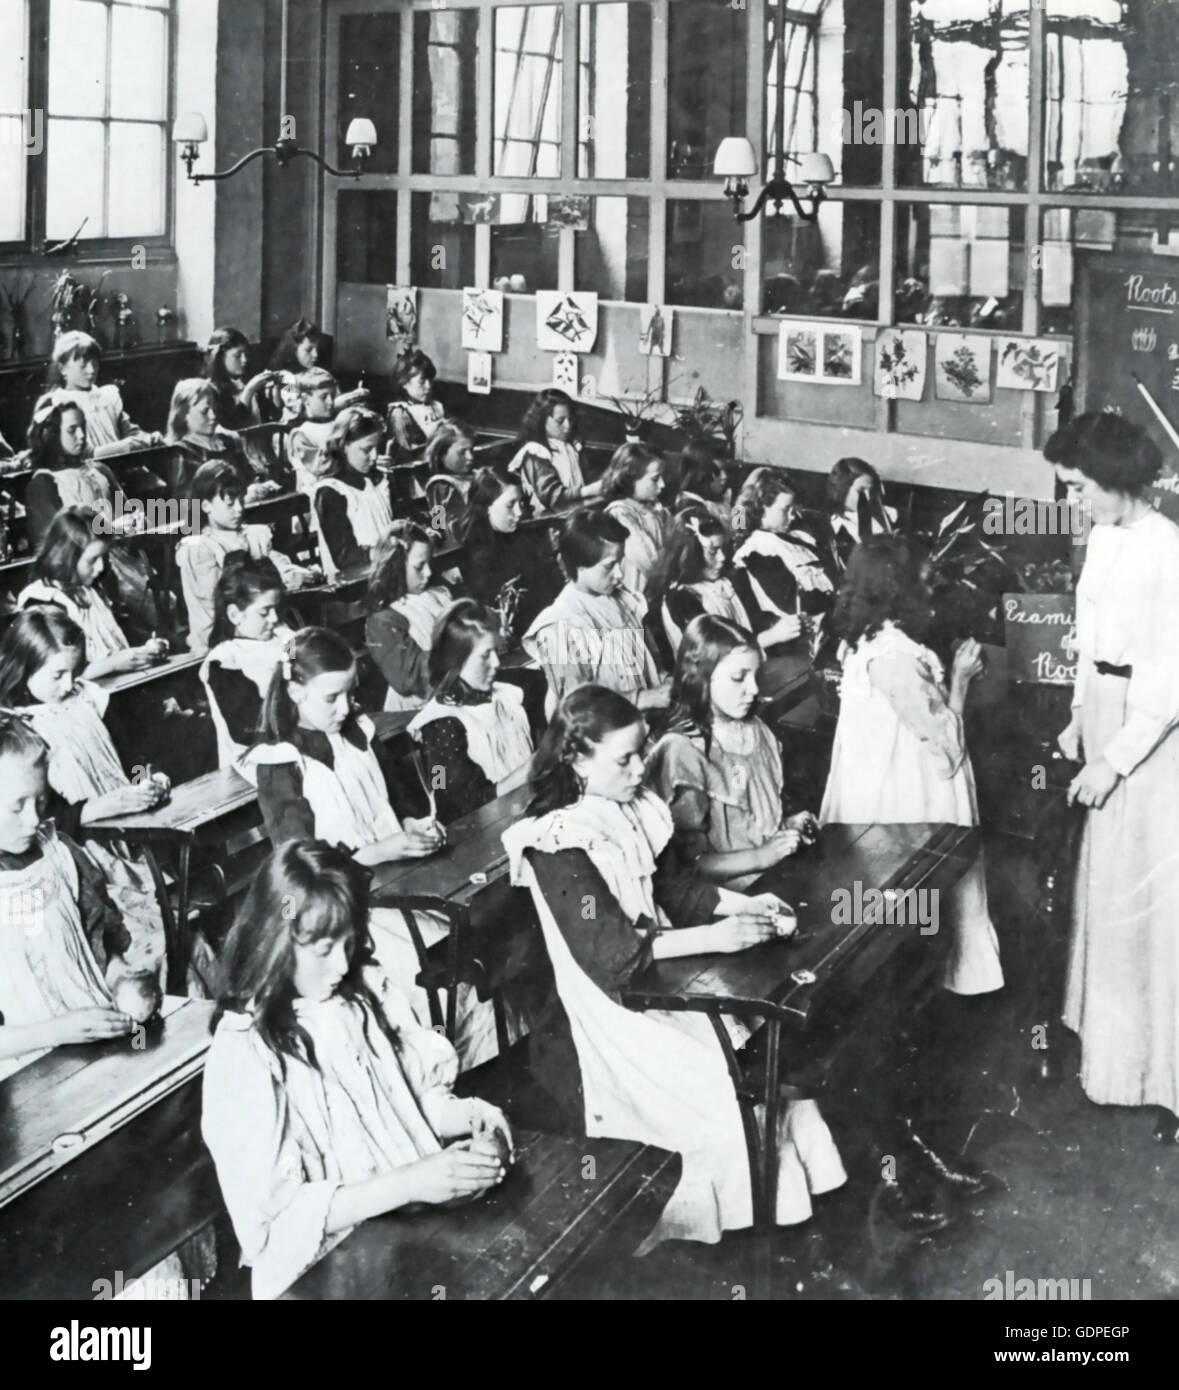 EDUCATION A girls' elementary school about 1910 where the class is ...